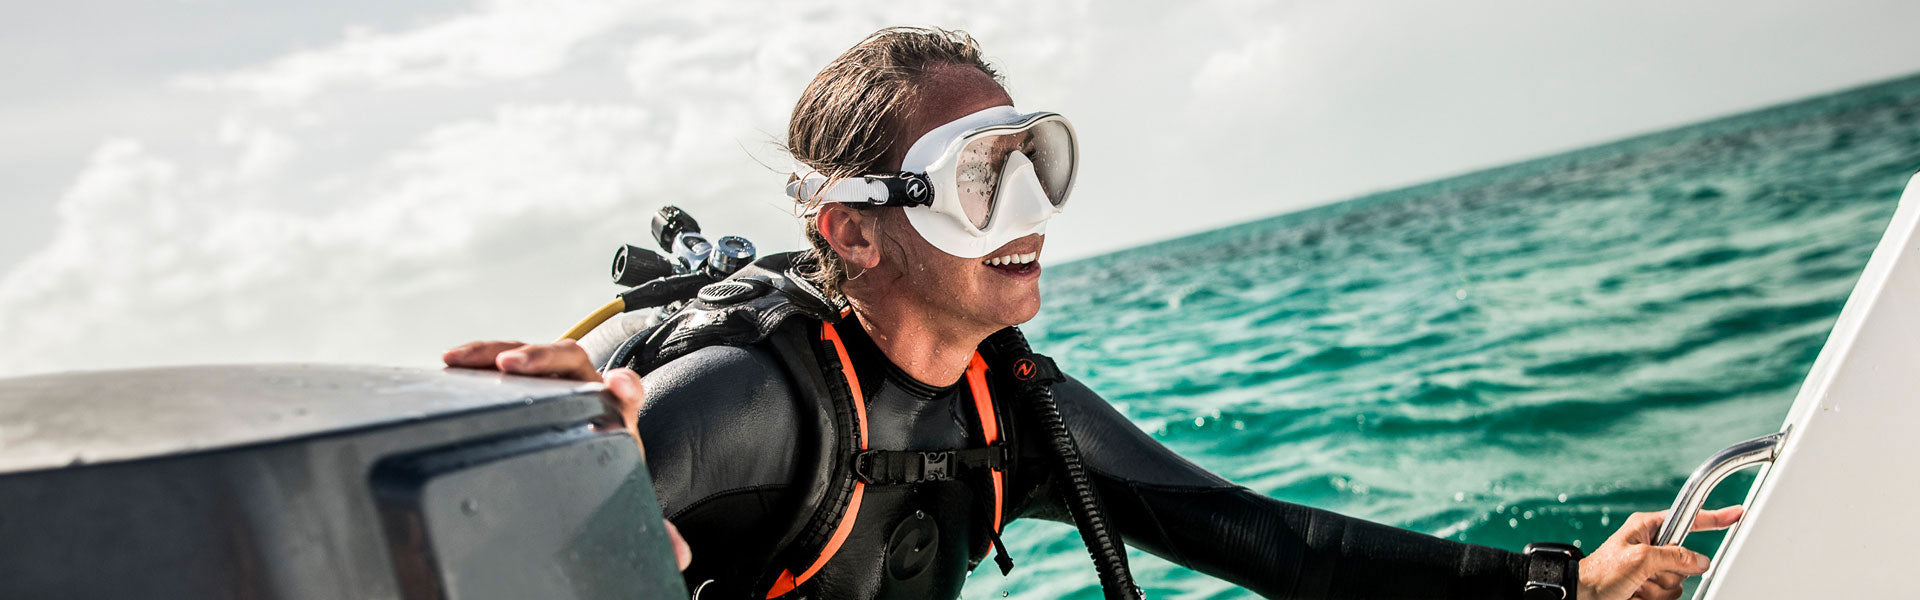 Scuba Diving Masks from Oyster Diving